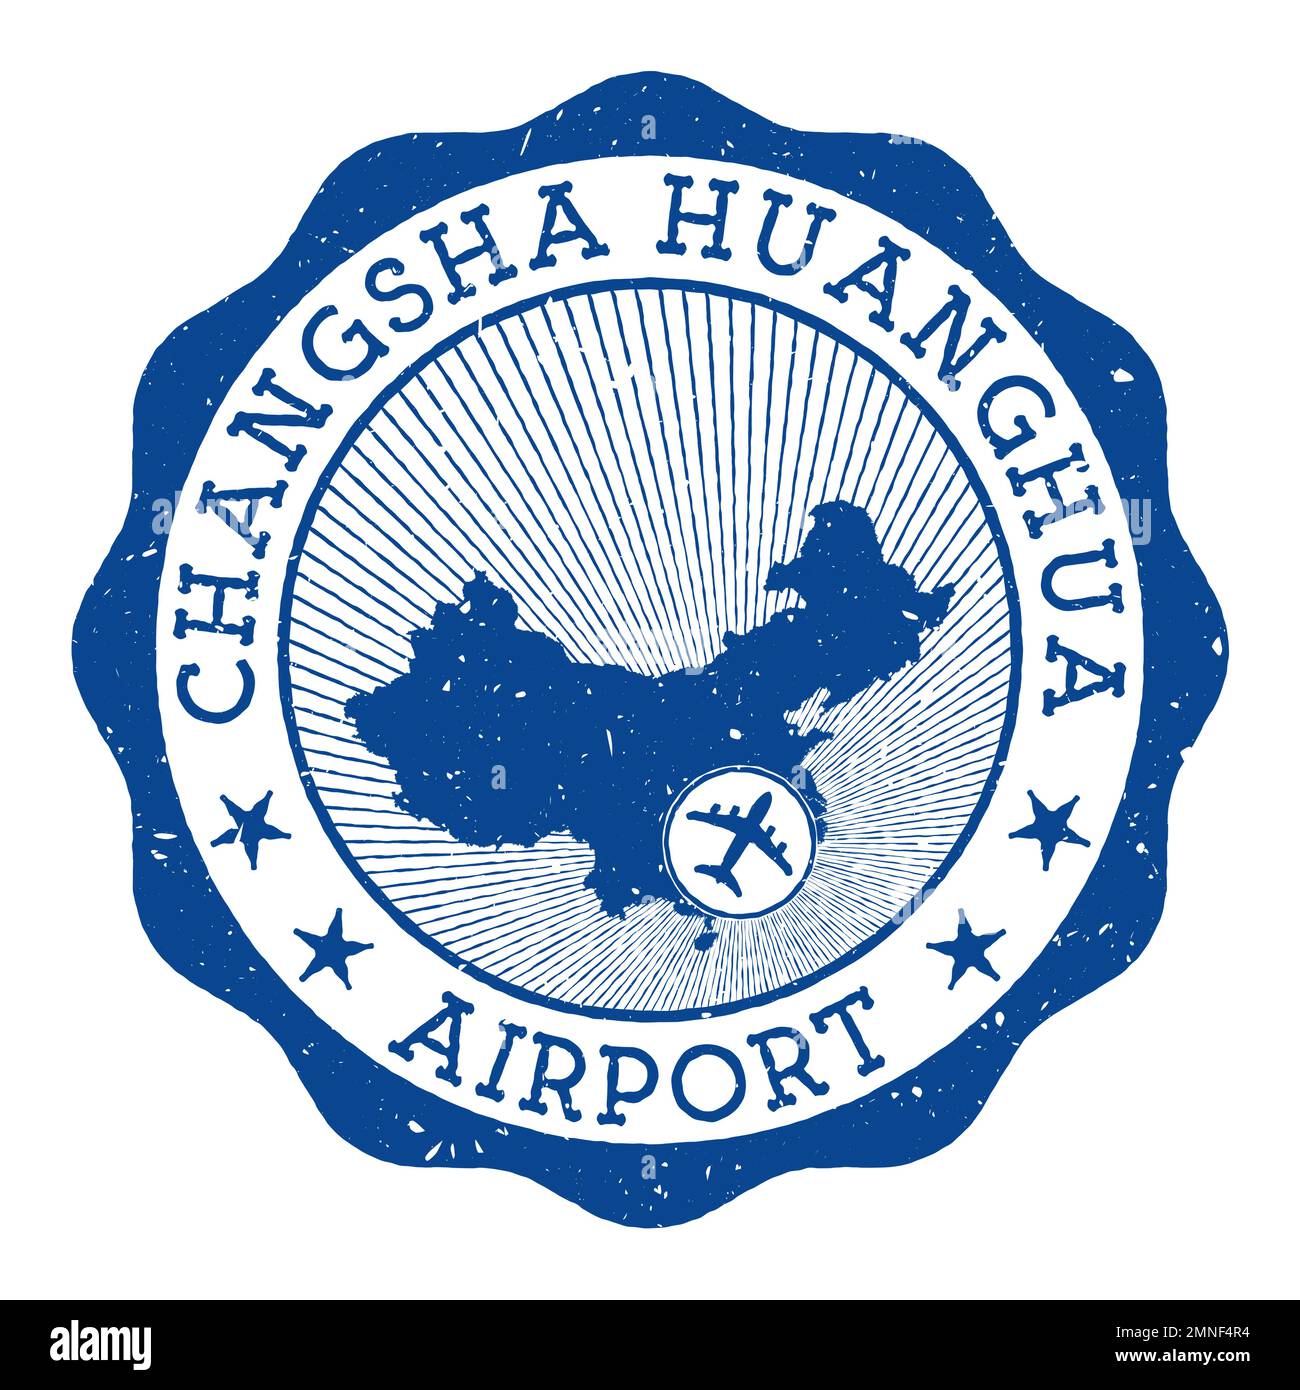 Changsha Huanghua Airport stamp. Airport of Changsha round logo with location on China map marked by airplane. Vector illustration. Stock Vector